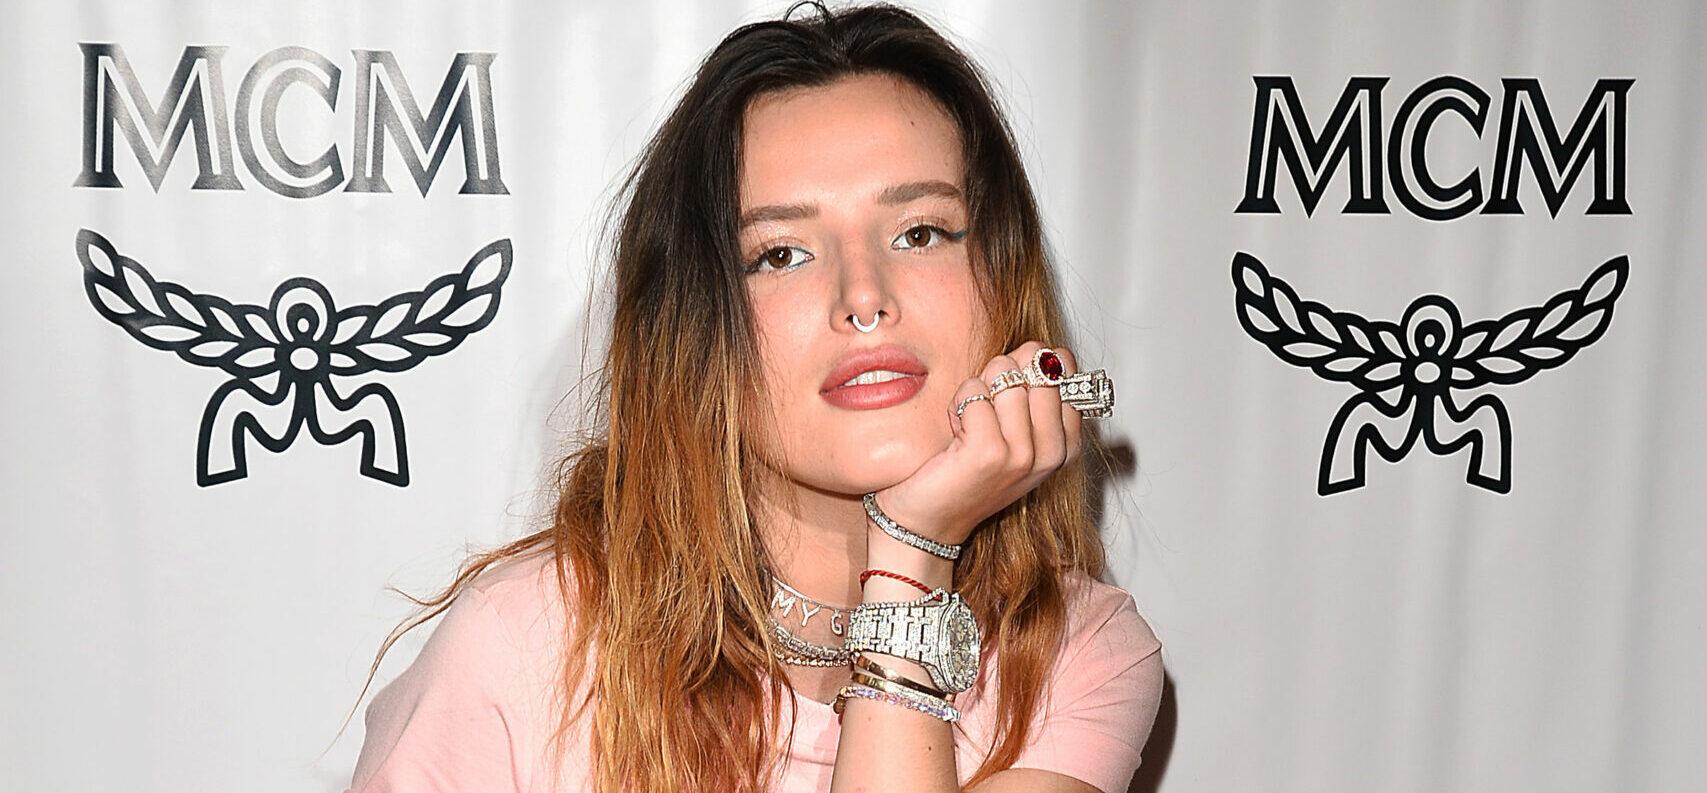 Bella Thorne Celebrates 24th Birthday With Breathtaking Party Pictures!